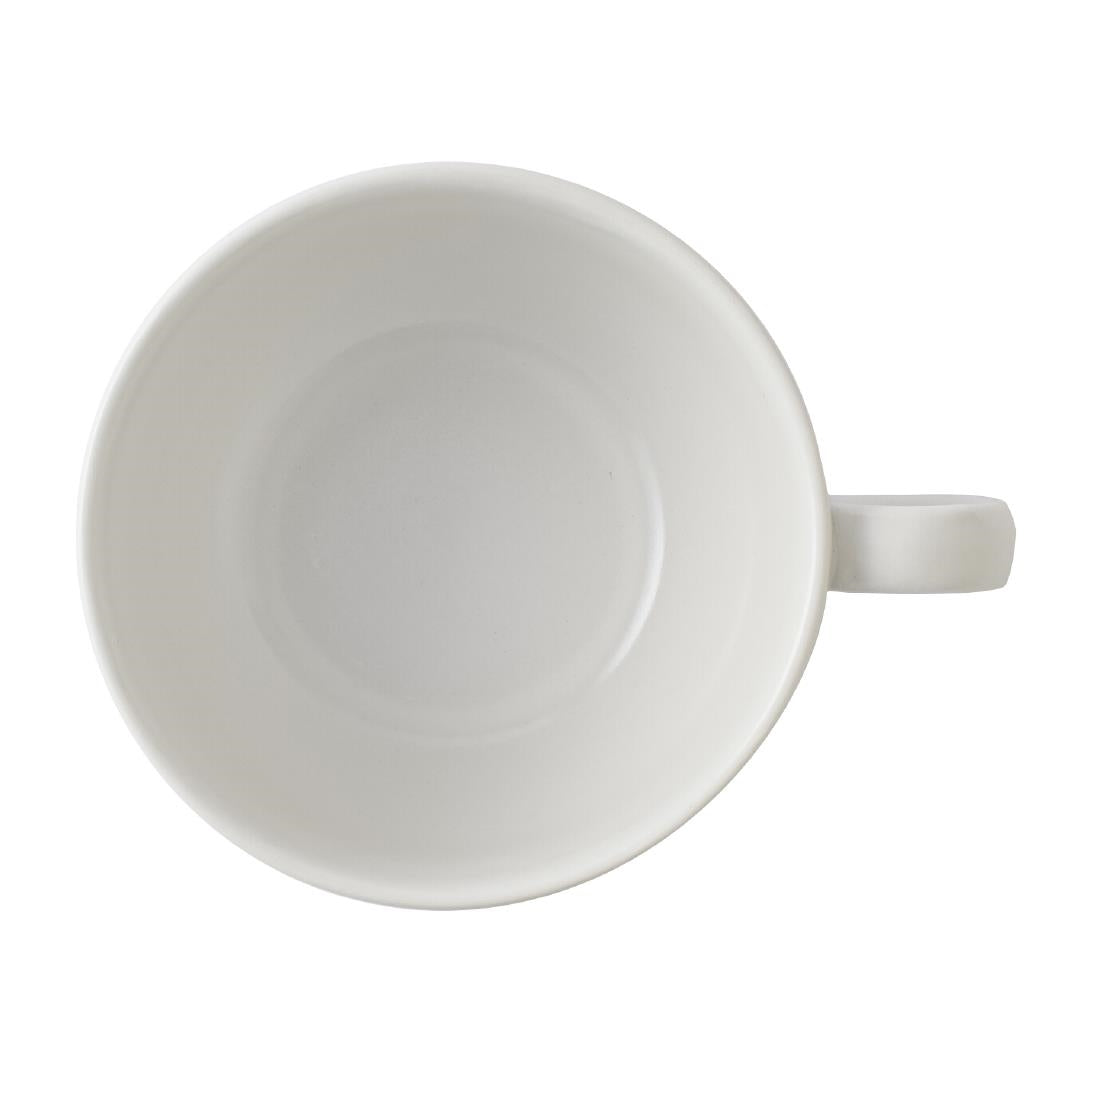 CU680 Churchill Dudson Harvest Norse White Cappuccino Cup 8oz (Pack of 12) JD Catering Equipment Solutions Ltd